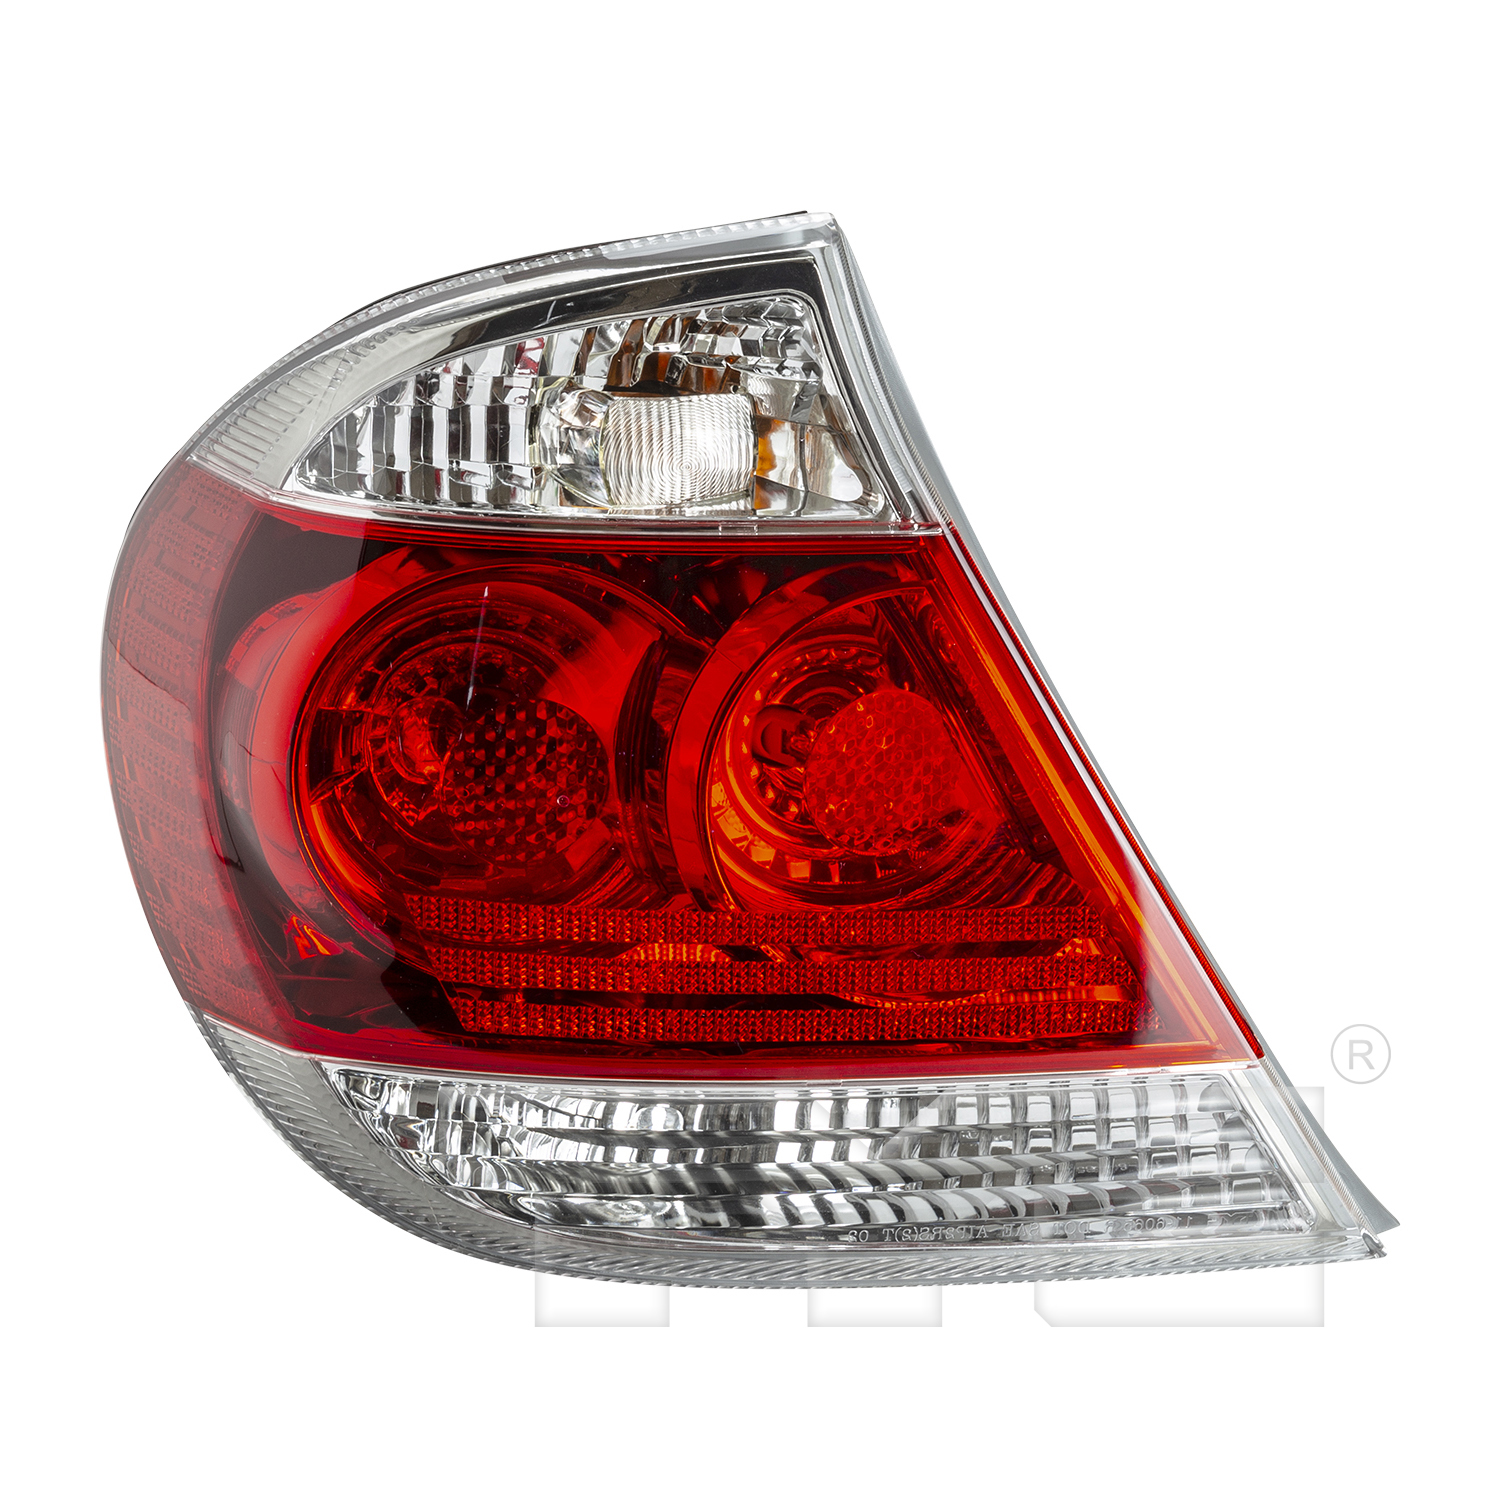 Aftermarket TAILLIGHTS for TOYOTA - CAMRY, CAMRY,05-06,LT Taillamp assy